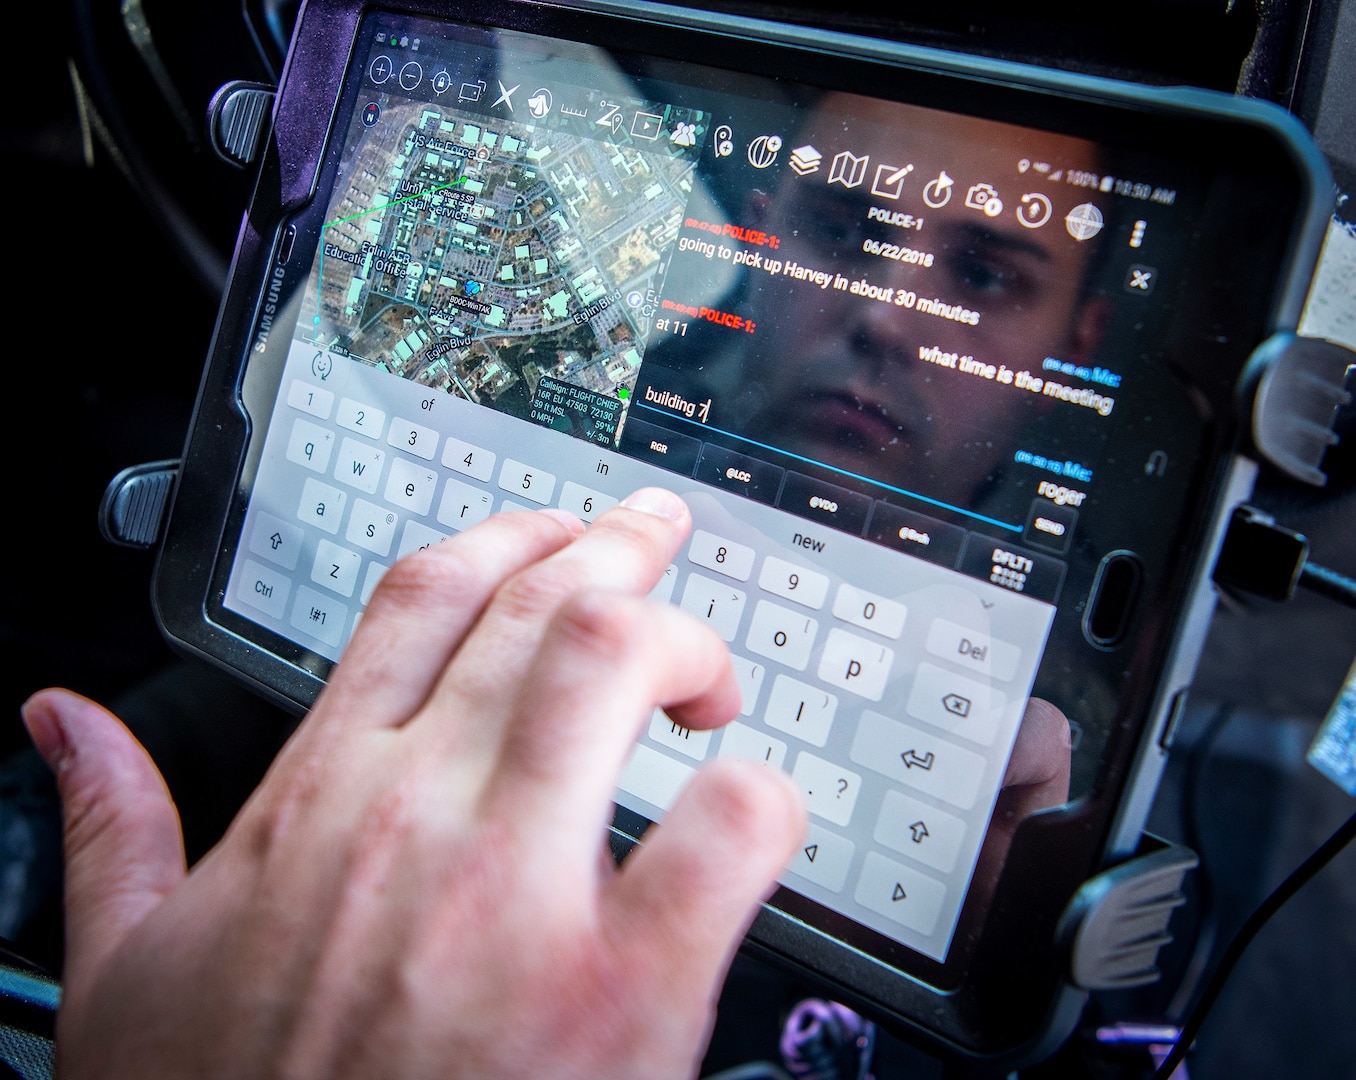 A 96th Security Forces Squadron uses the android tactical assault kit to send a message from his patrol vehicle July 5, 2017 at Eglin Air Force Base, Fla. Smart devices can provide a great level of convenience, however there are steps that must be taken in order to keep them secure.